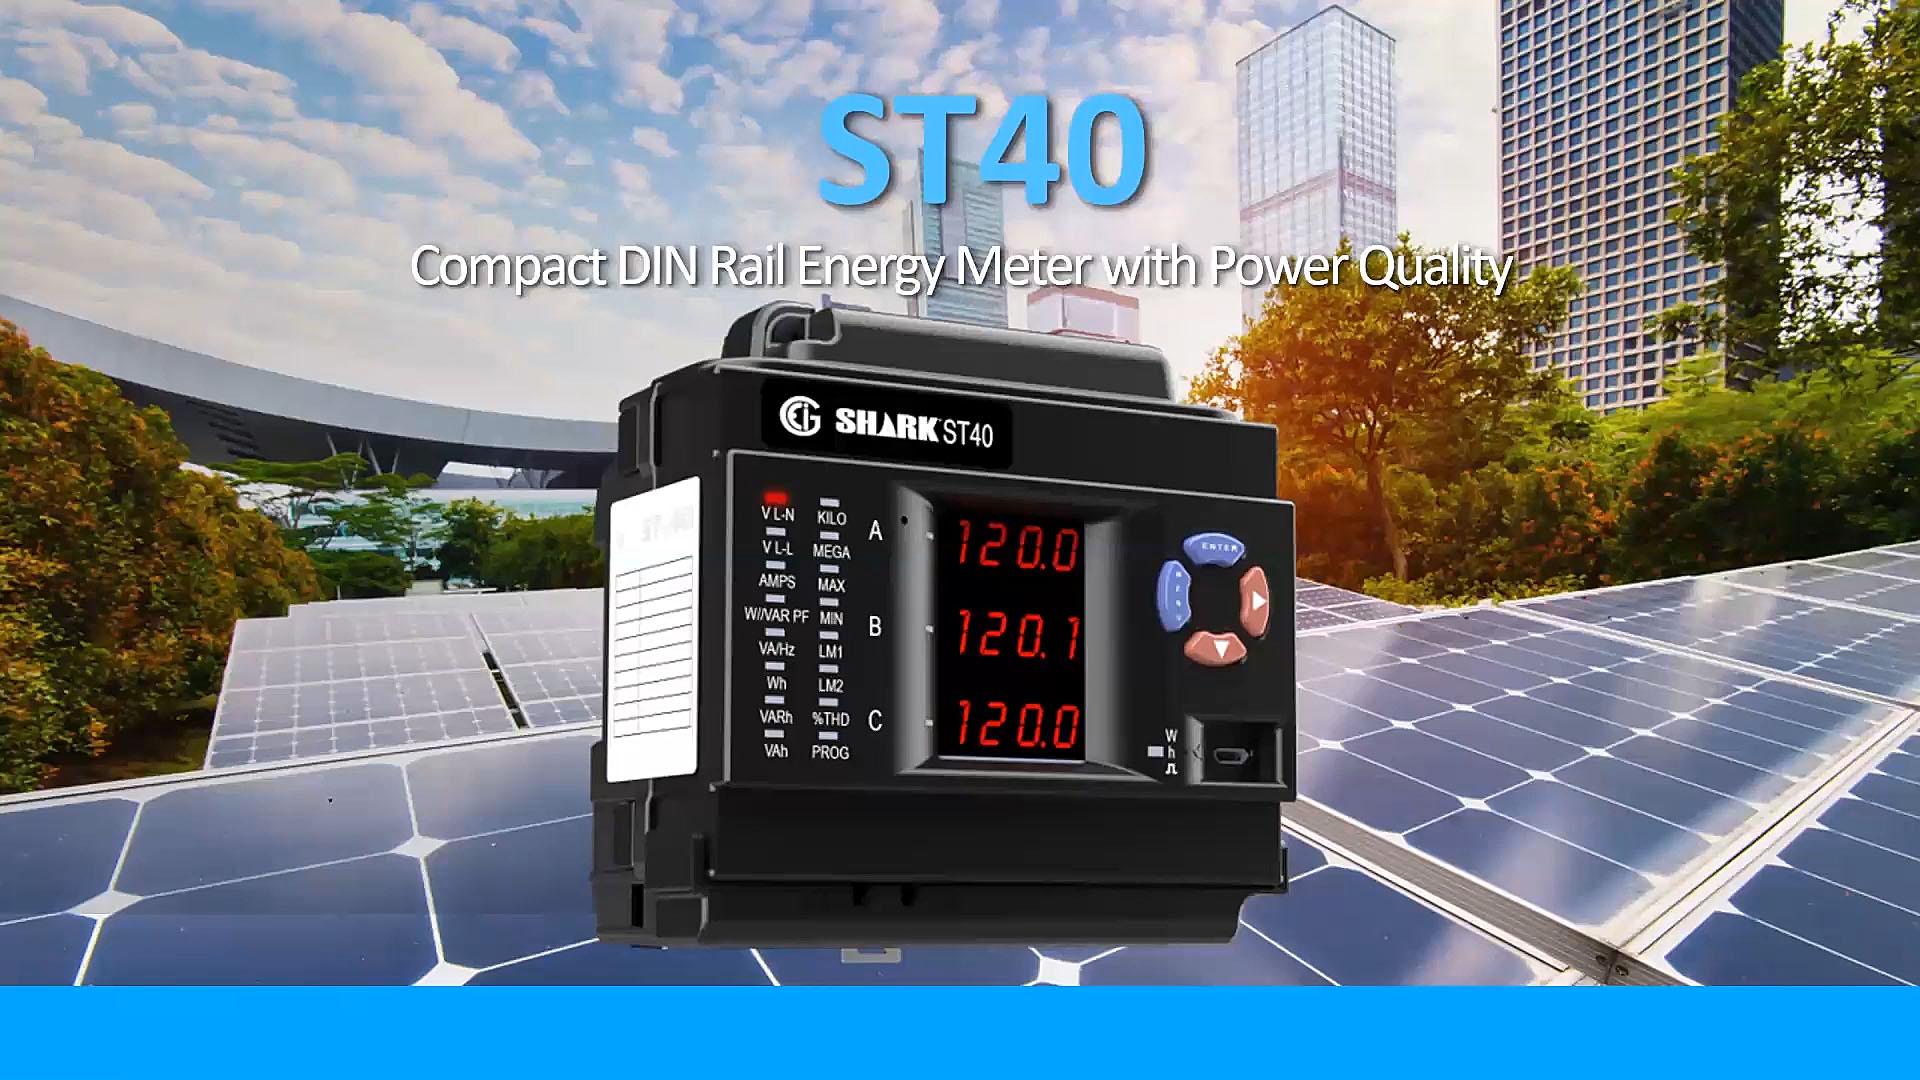 EIG's ST40 Compact DIN Rail Energy Meter with Power Quality